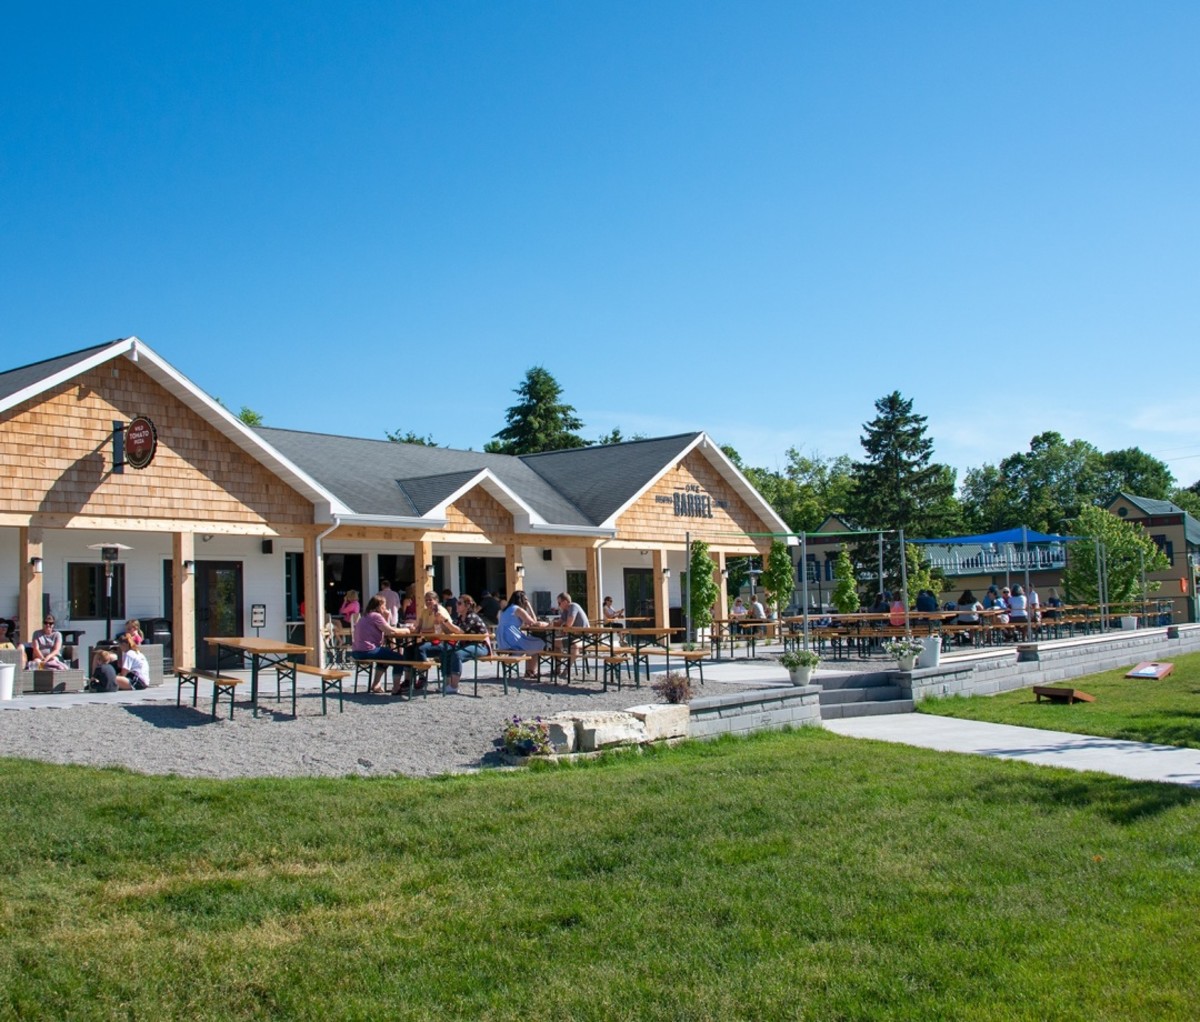 Exterior of One Barrel Brewing Company with a beer garden and people at outdoor tables by a lawn